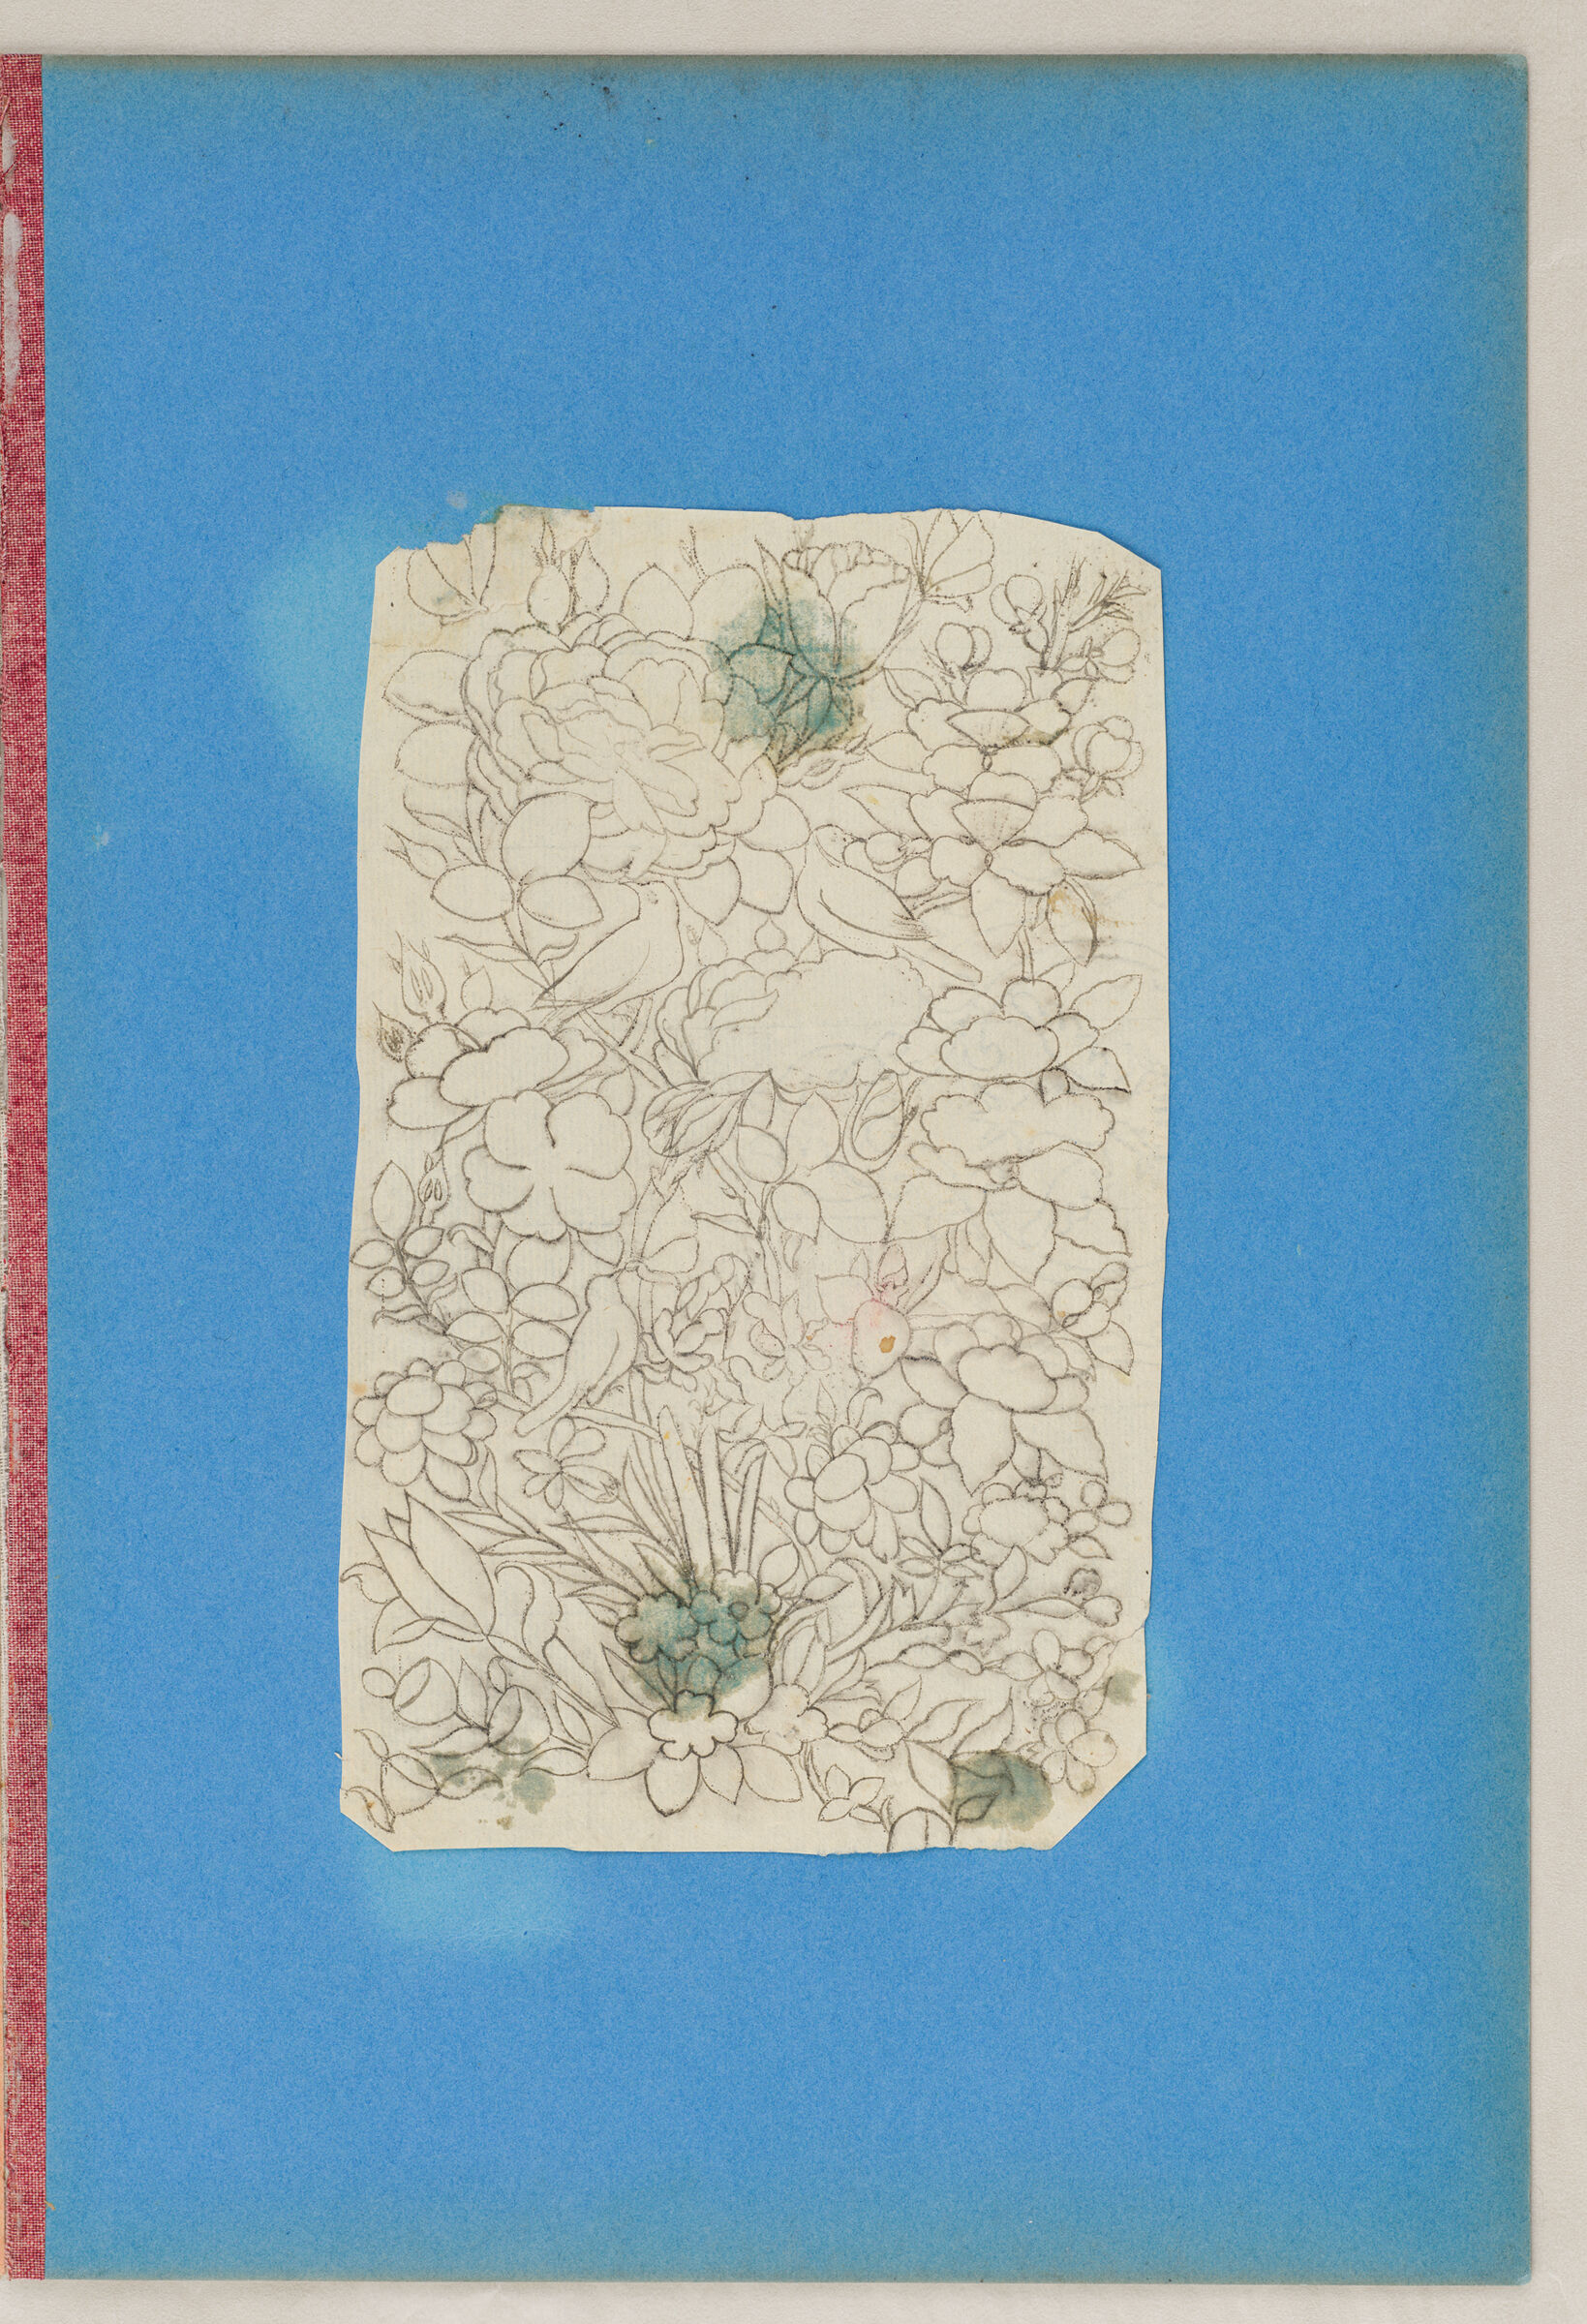 Folio 2 From An Album Of Artists' Drawings From Qajar Iran: Blank Page (Recto); Birds, Flowers, And Butterflies (Verso)